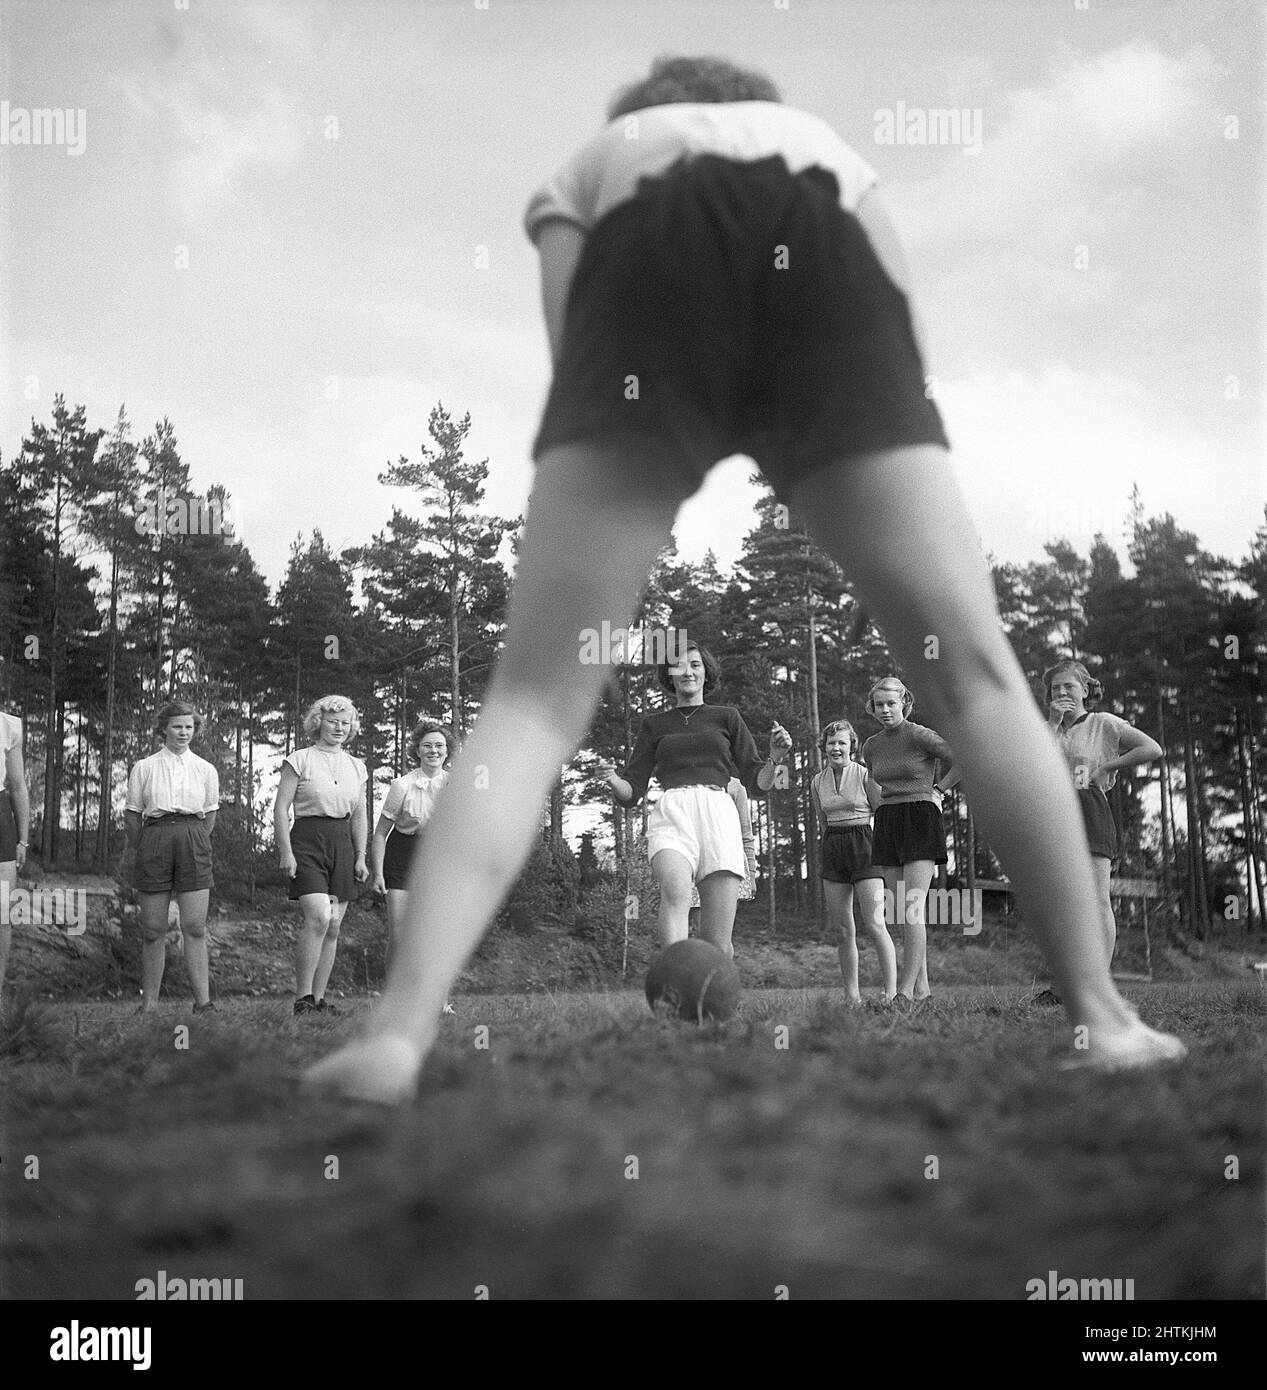 In the 1950s. A women's soccer team during practise. One by one they shoot the ball at the goalkeeper who is pictured from behind. Sweden 1951 Kristoffersson BE37-12 Stock Photo